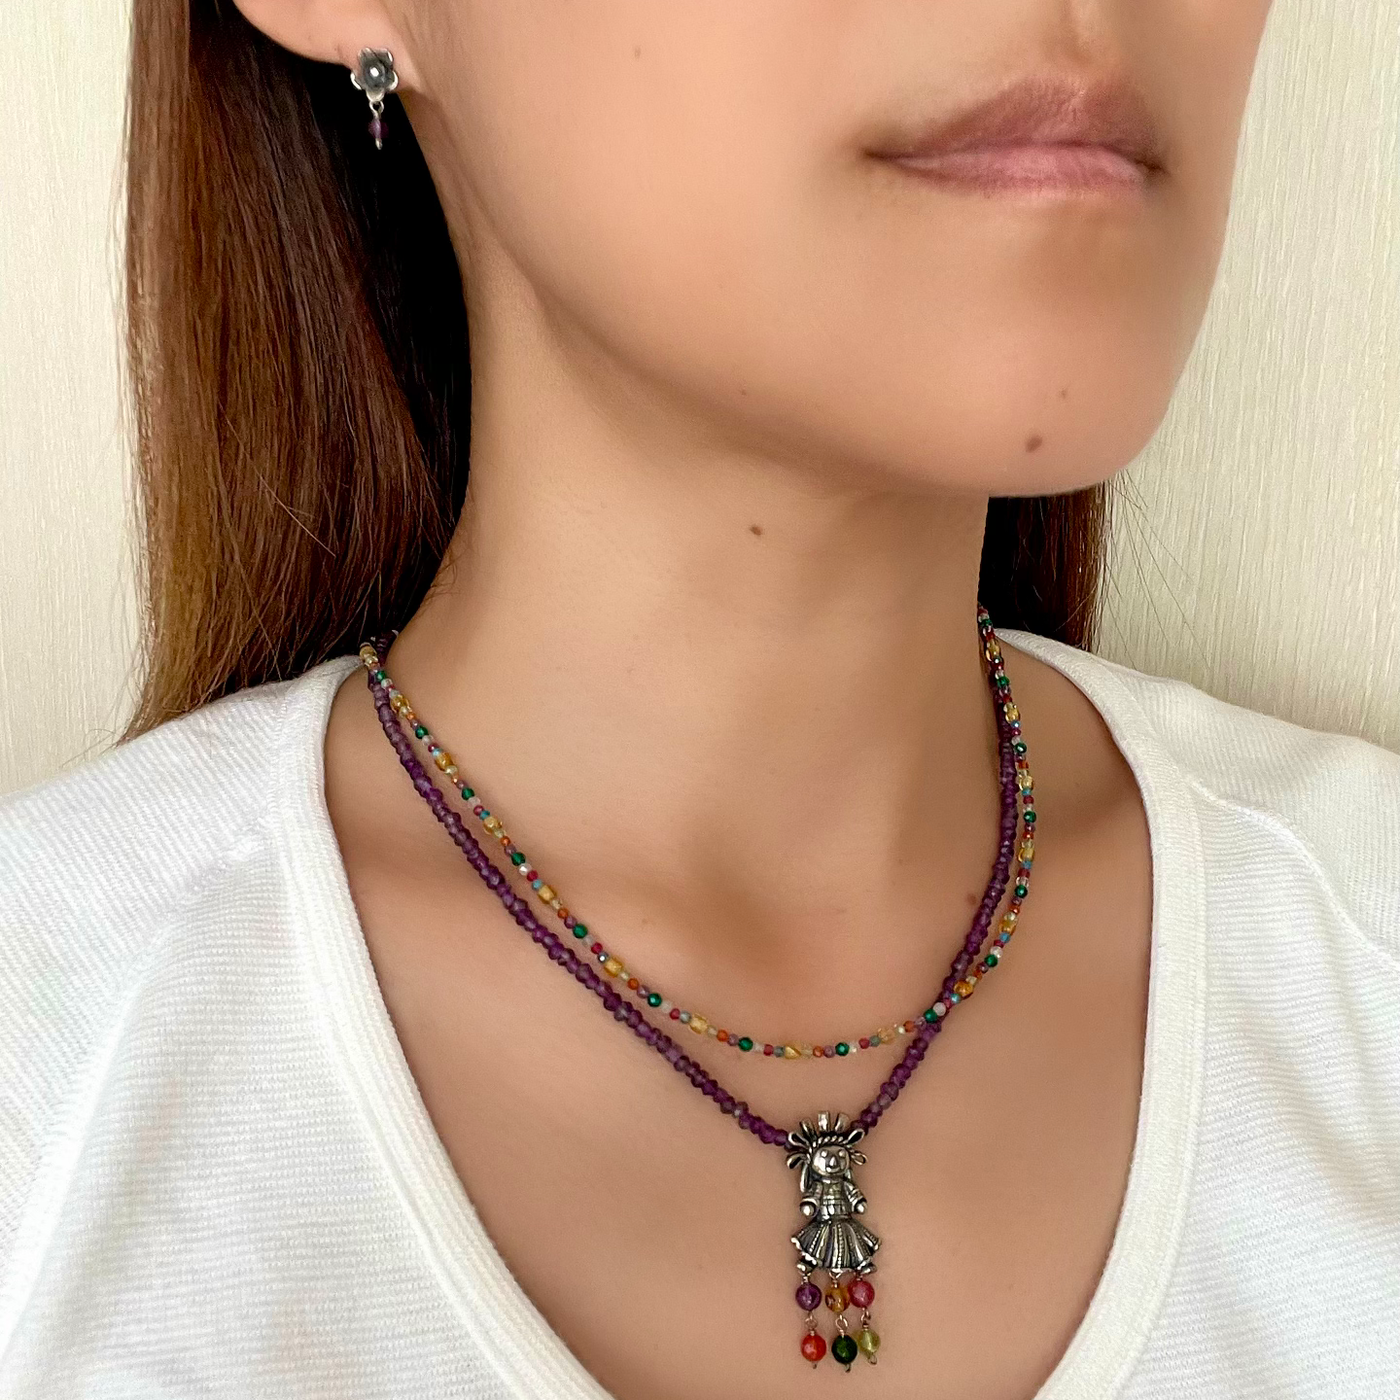 Collar muñeca María y Aretes flores｜マリア人形のネックレス＆ピアスセット（シルバー・アメジスト・天然石）